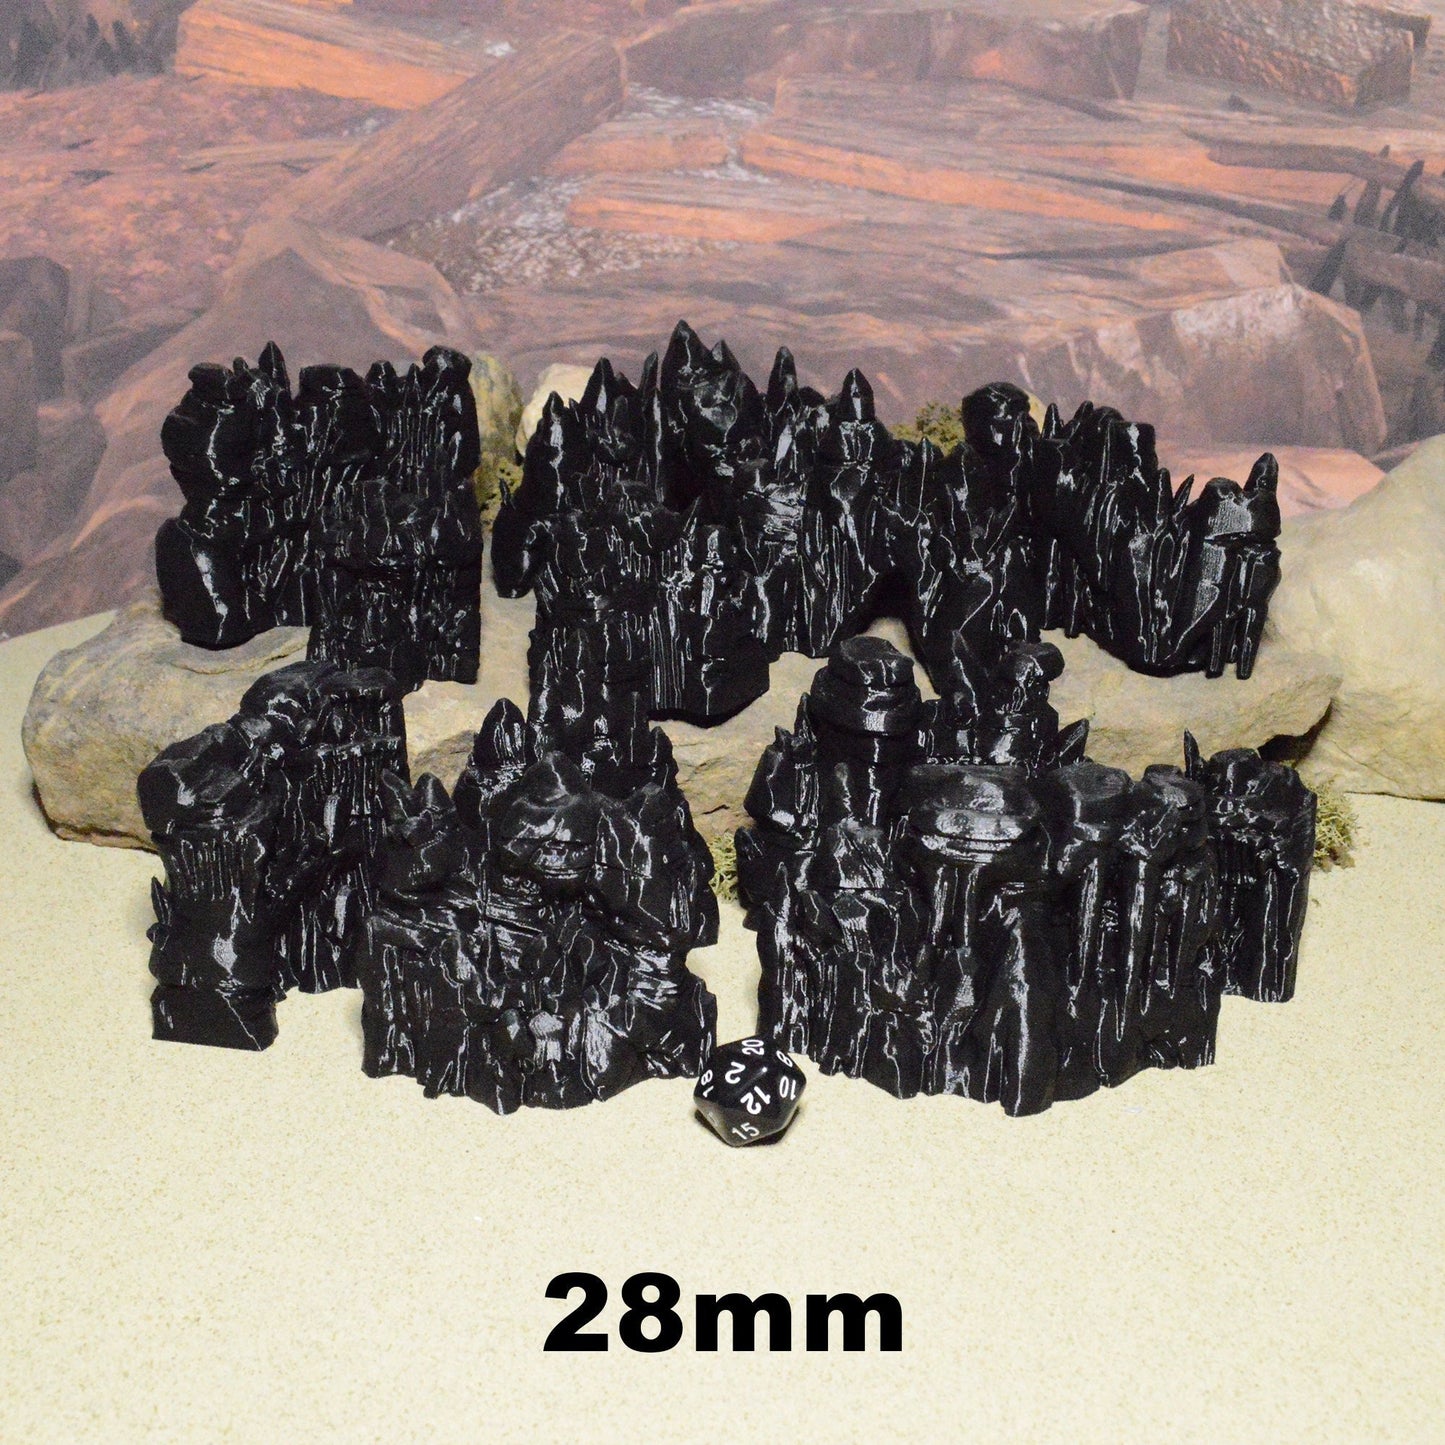 Crystal Grotto Walls 15mm 28mm for D&D Terrain, DnD Pathfinder Underdark Fantasy Cavern Stones, Out of the Abyss